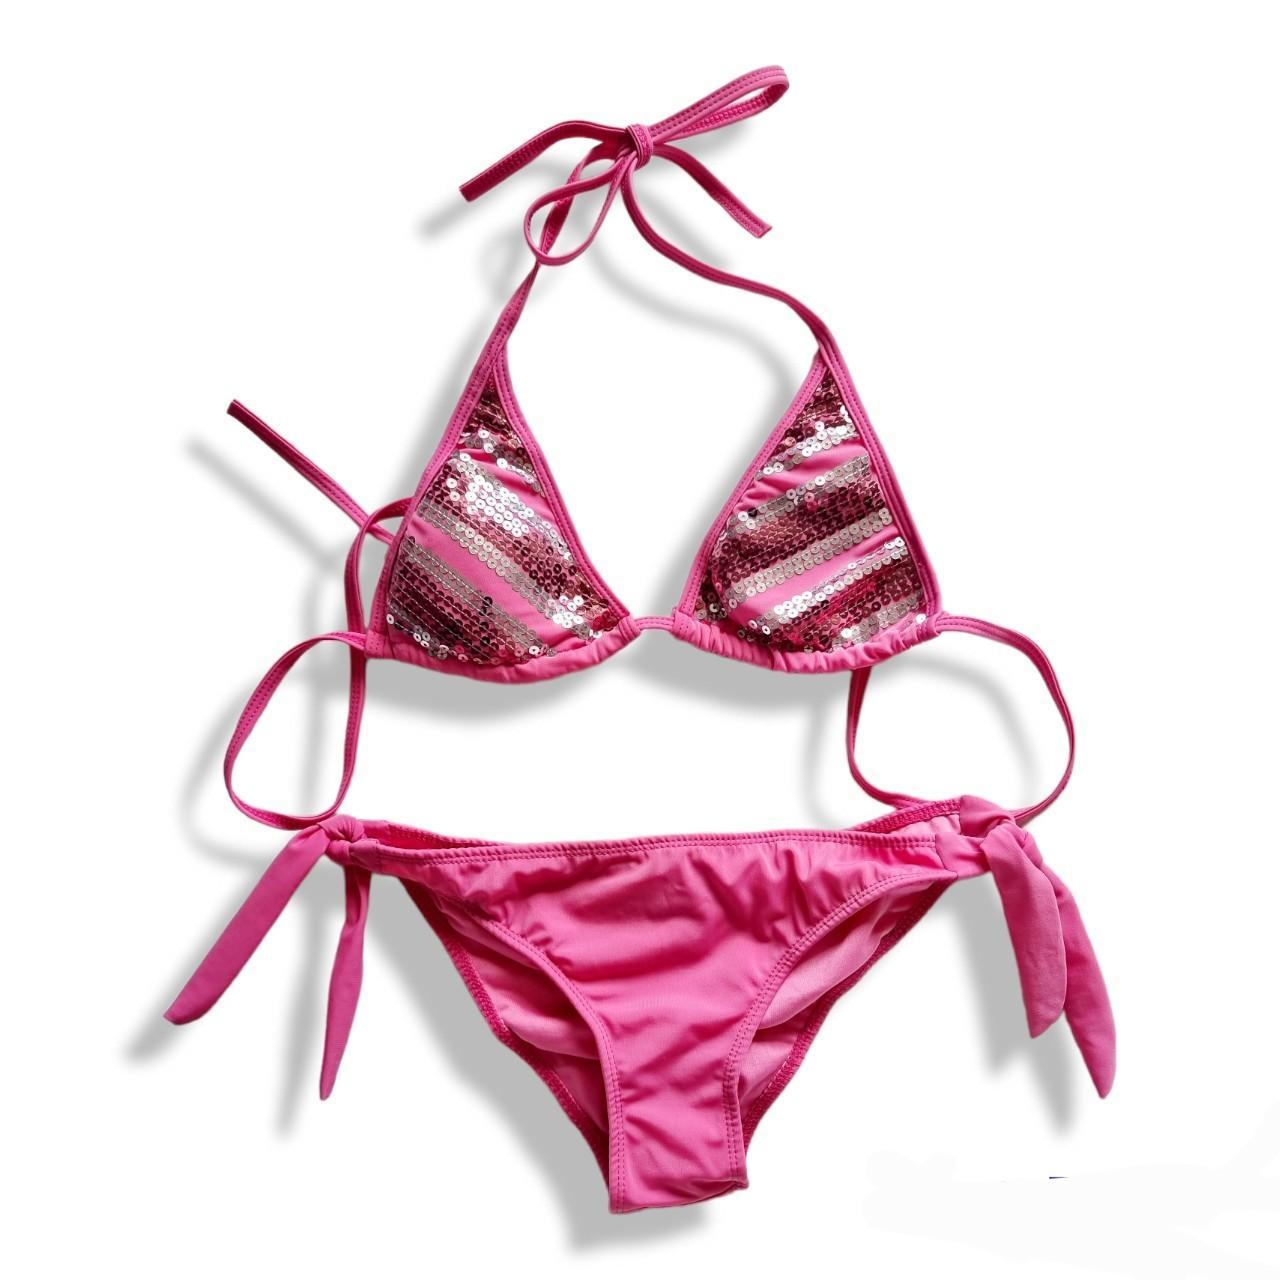 Bright Pink Halter Triangle Bikini With Pink And Depop